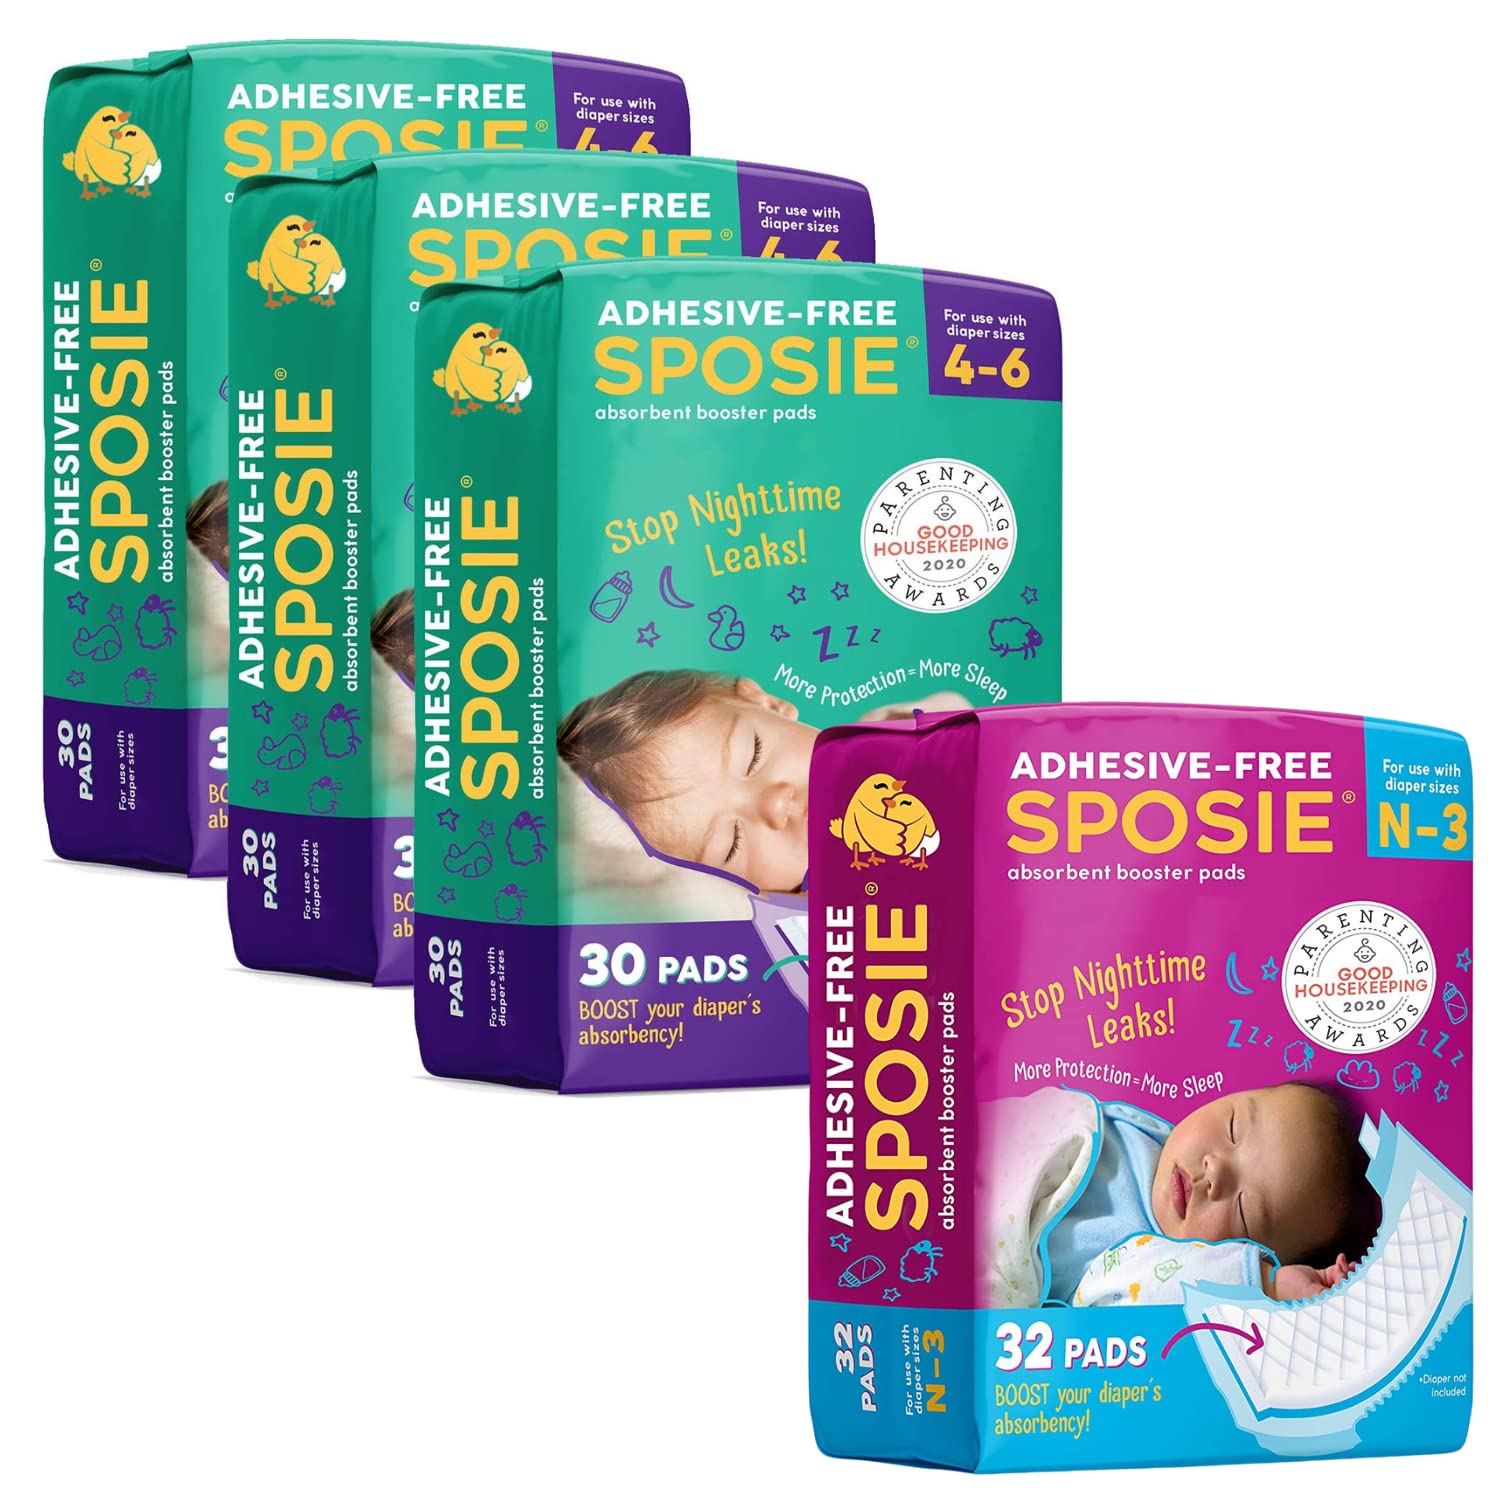 Sposie Diaper Booster Pads Gift Bundle for Girls and Boys | Overnight Diaper Leak Protection for Your Baby That's in-Between Sizes | 122 Total Non-Adhesive Pads, Fits Newborn Diapers to Size 4-6